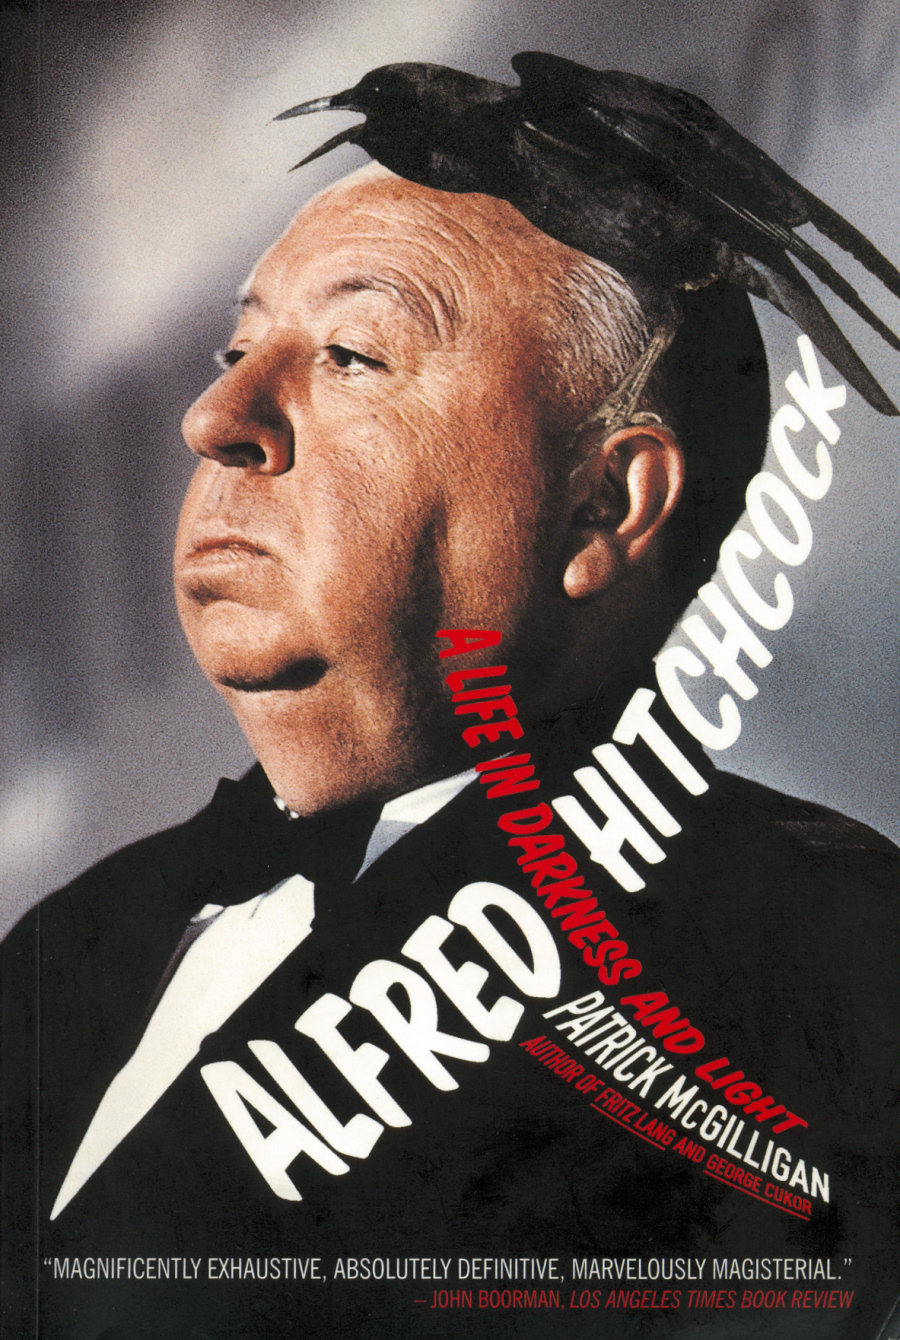 Alfred Hitchcock: A Life in Darkness and Light (2003) by Patrick McGilligan